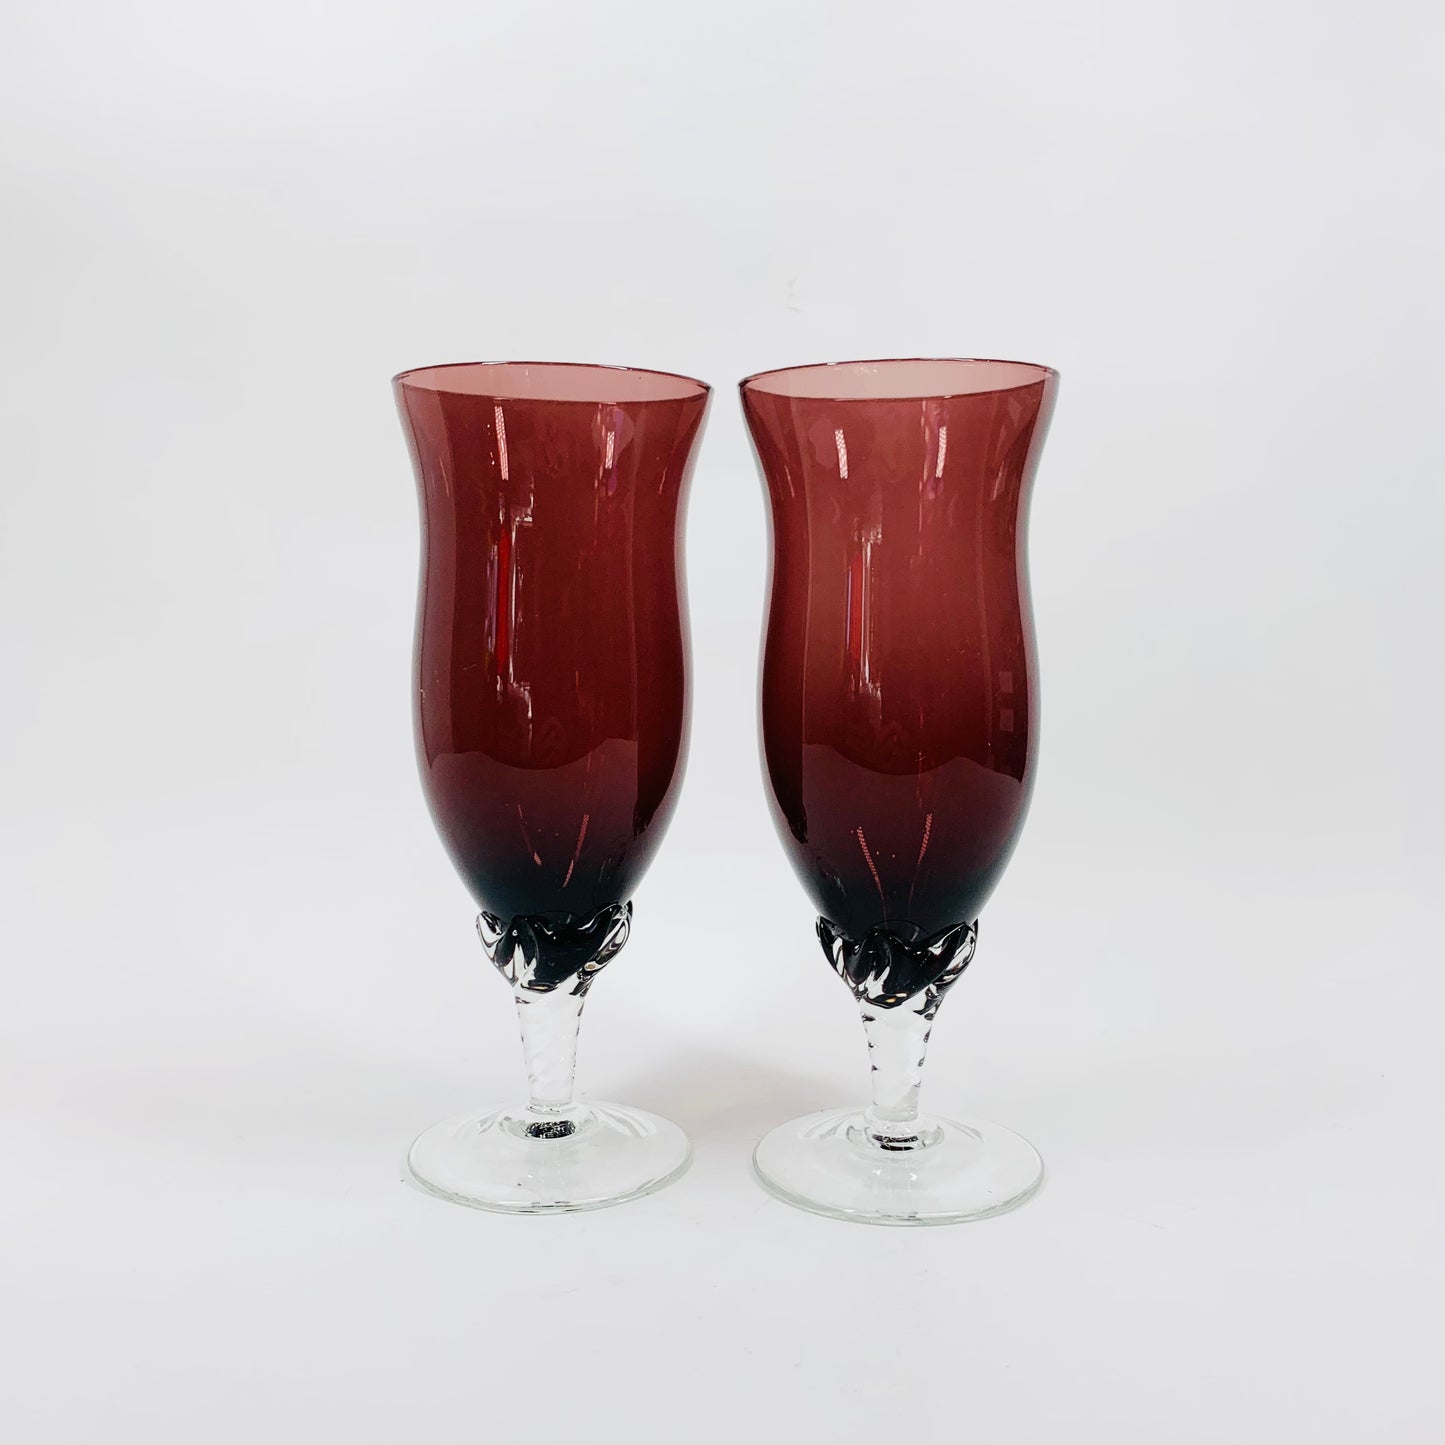 Midcentury amethyst glass champagne flutes with twist stems